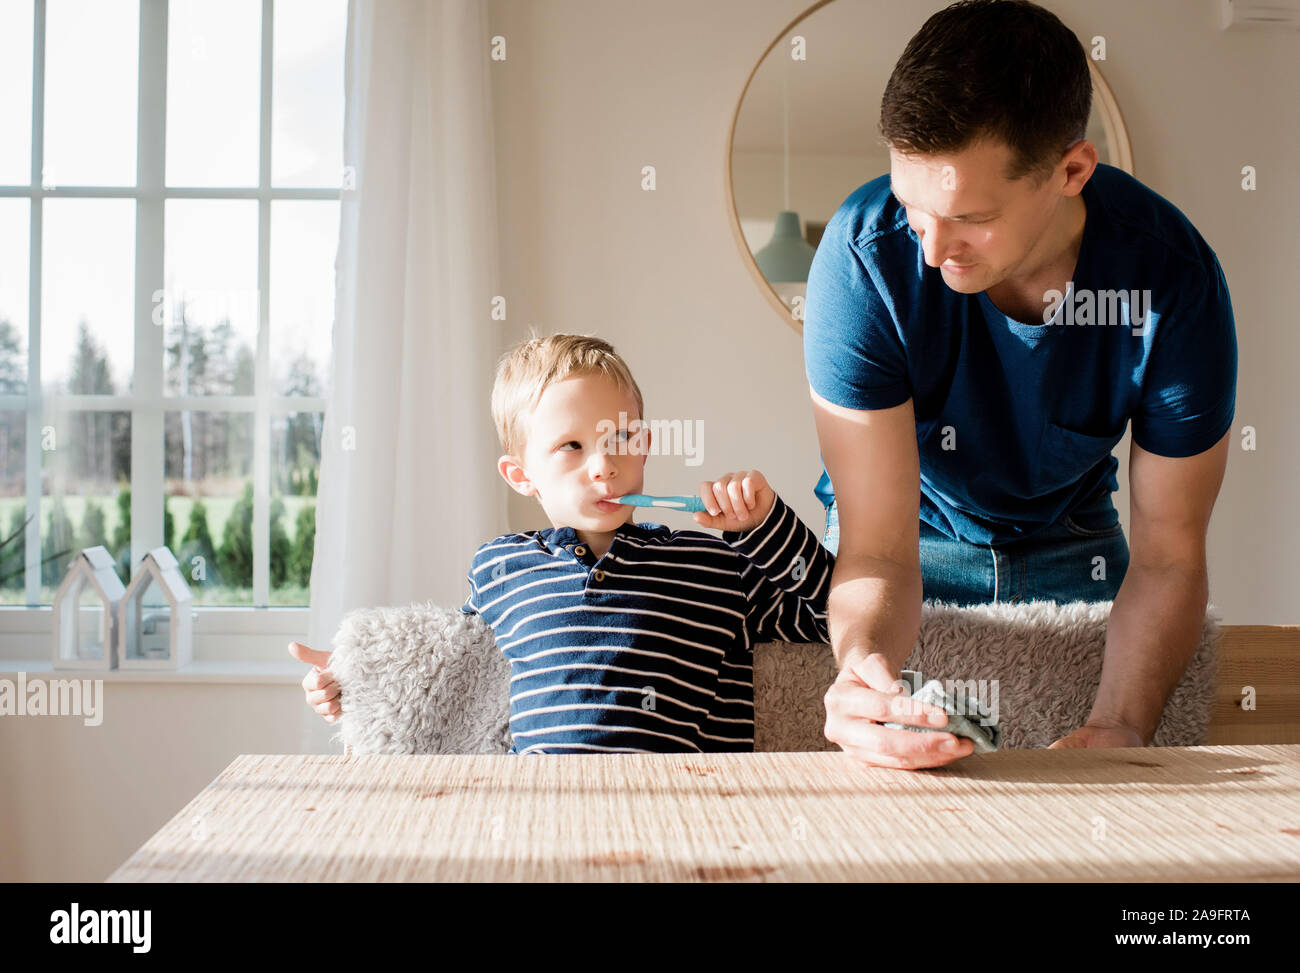 young boy brushing his teeth looking at his dad before school Stock Photo